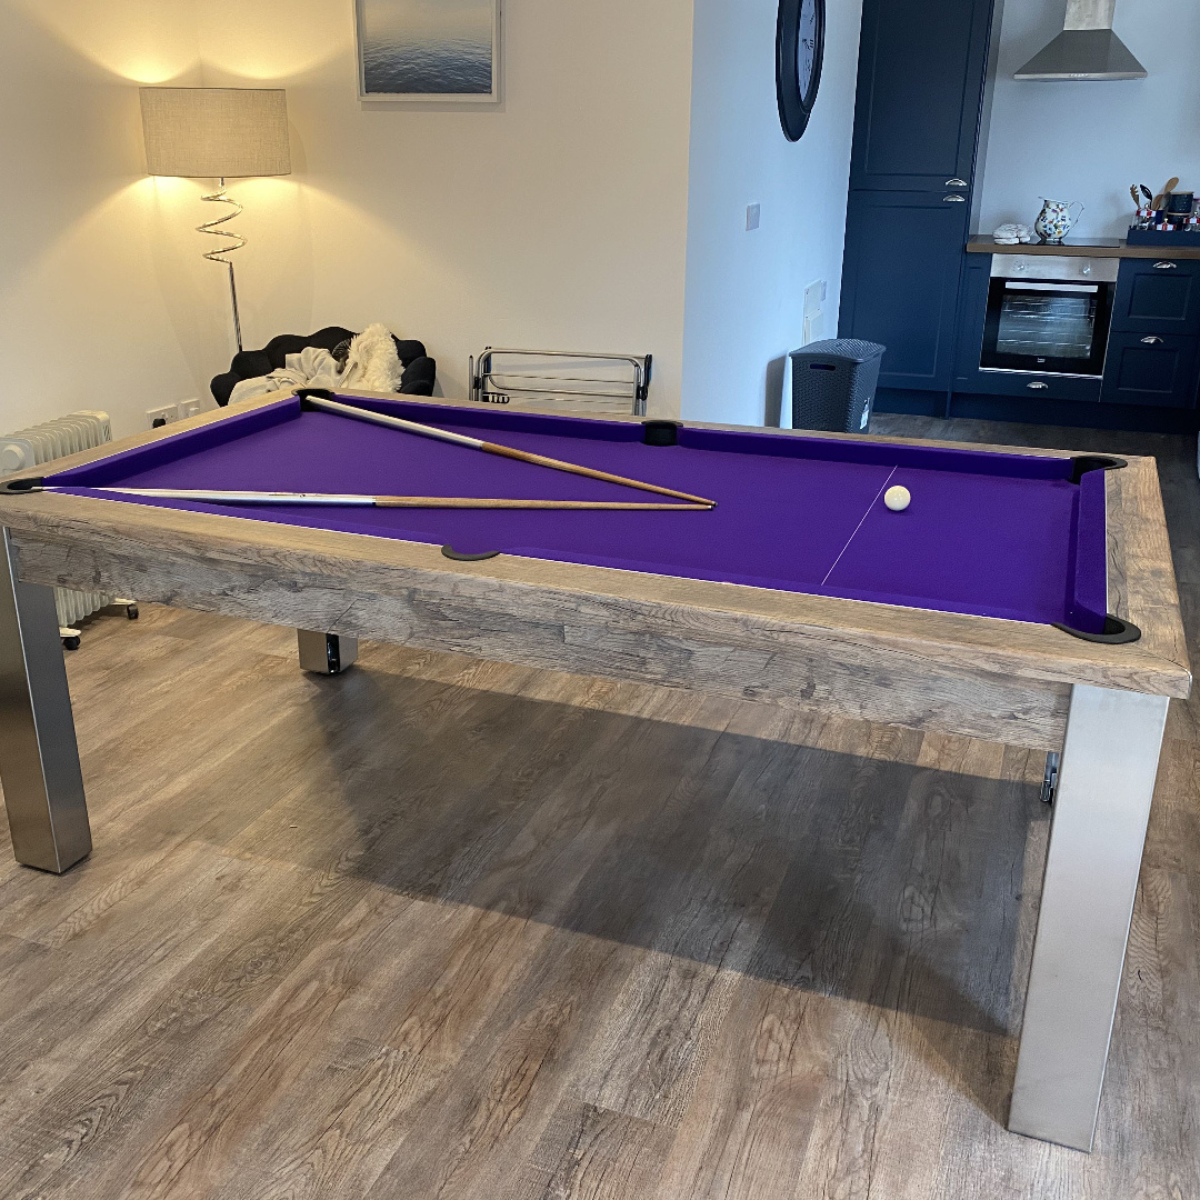 The Elixir 6ft & 7ft British Pool Table W/Dining Top Distressed Oak